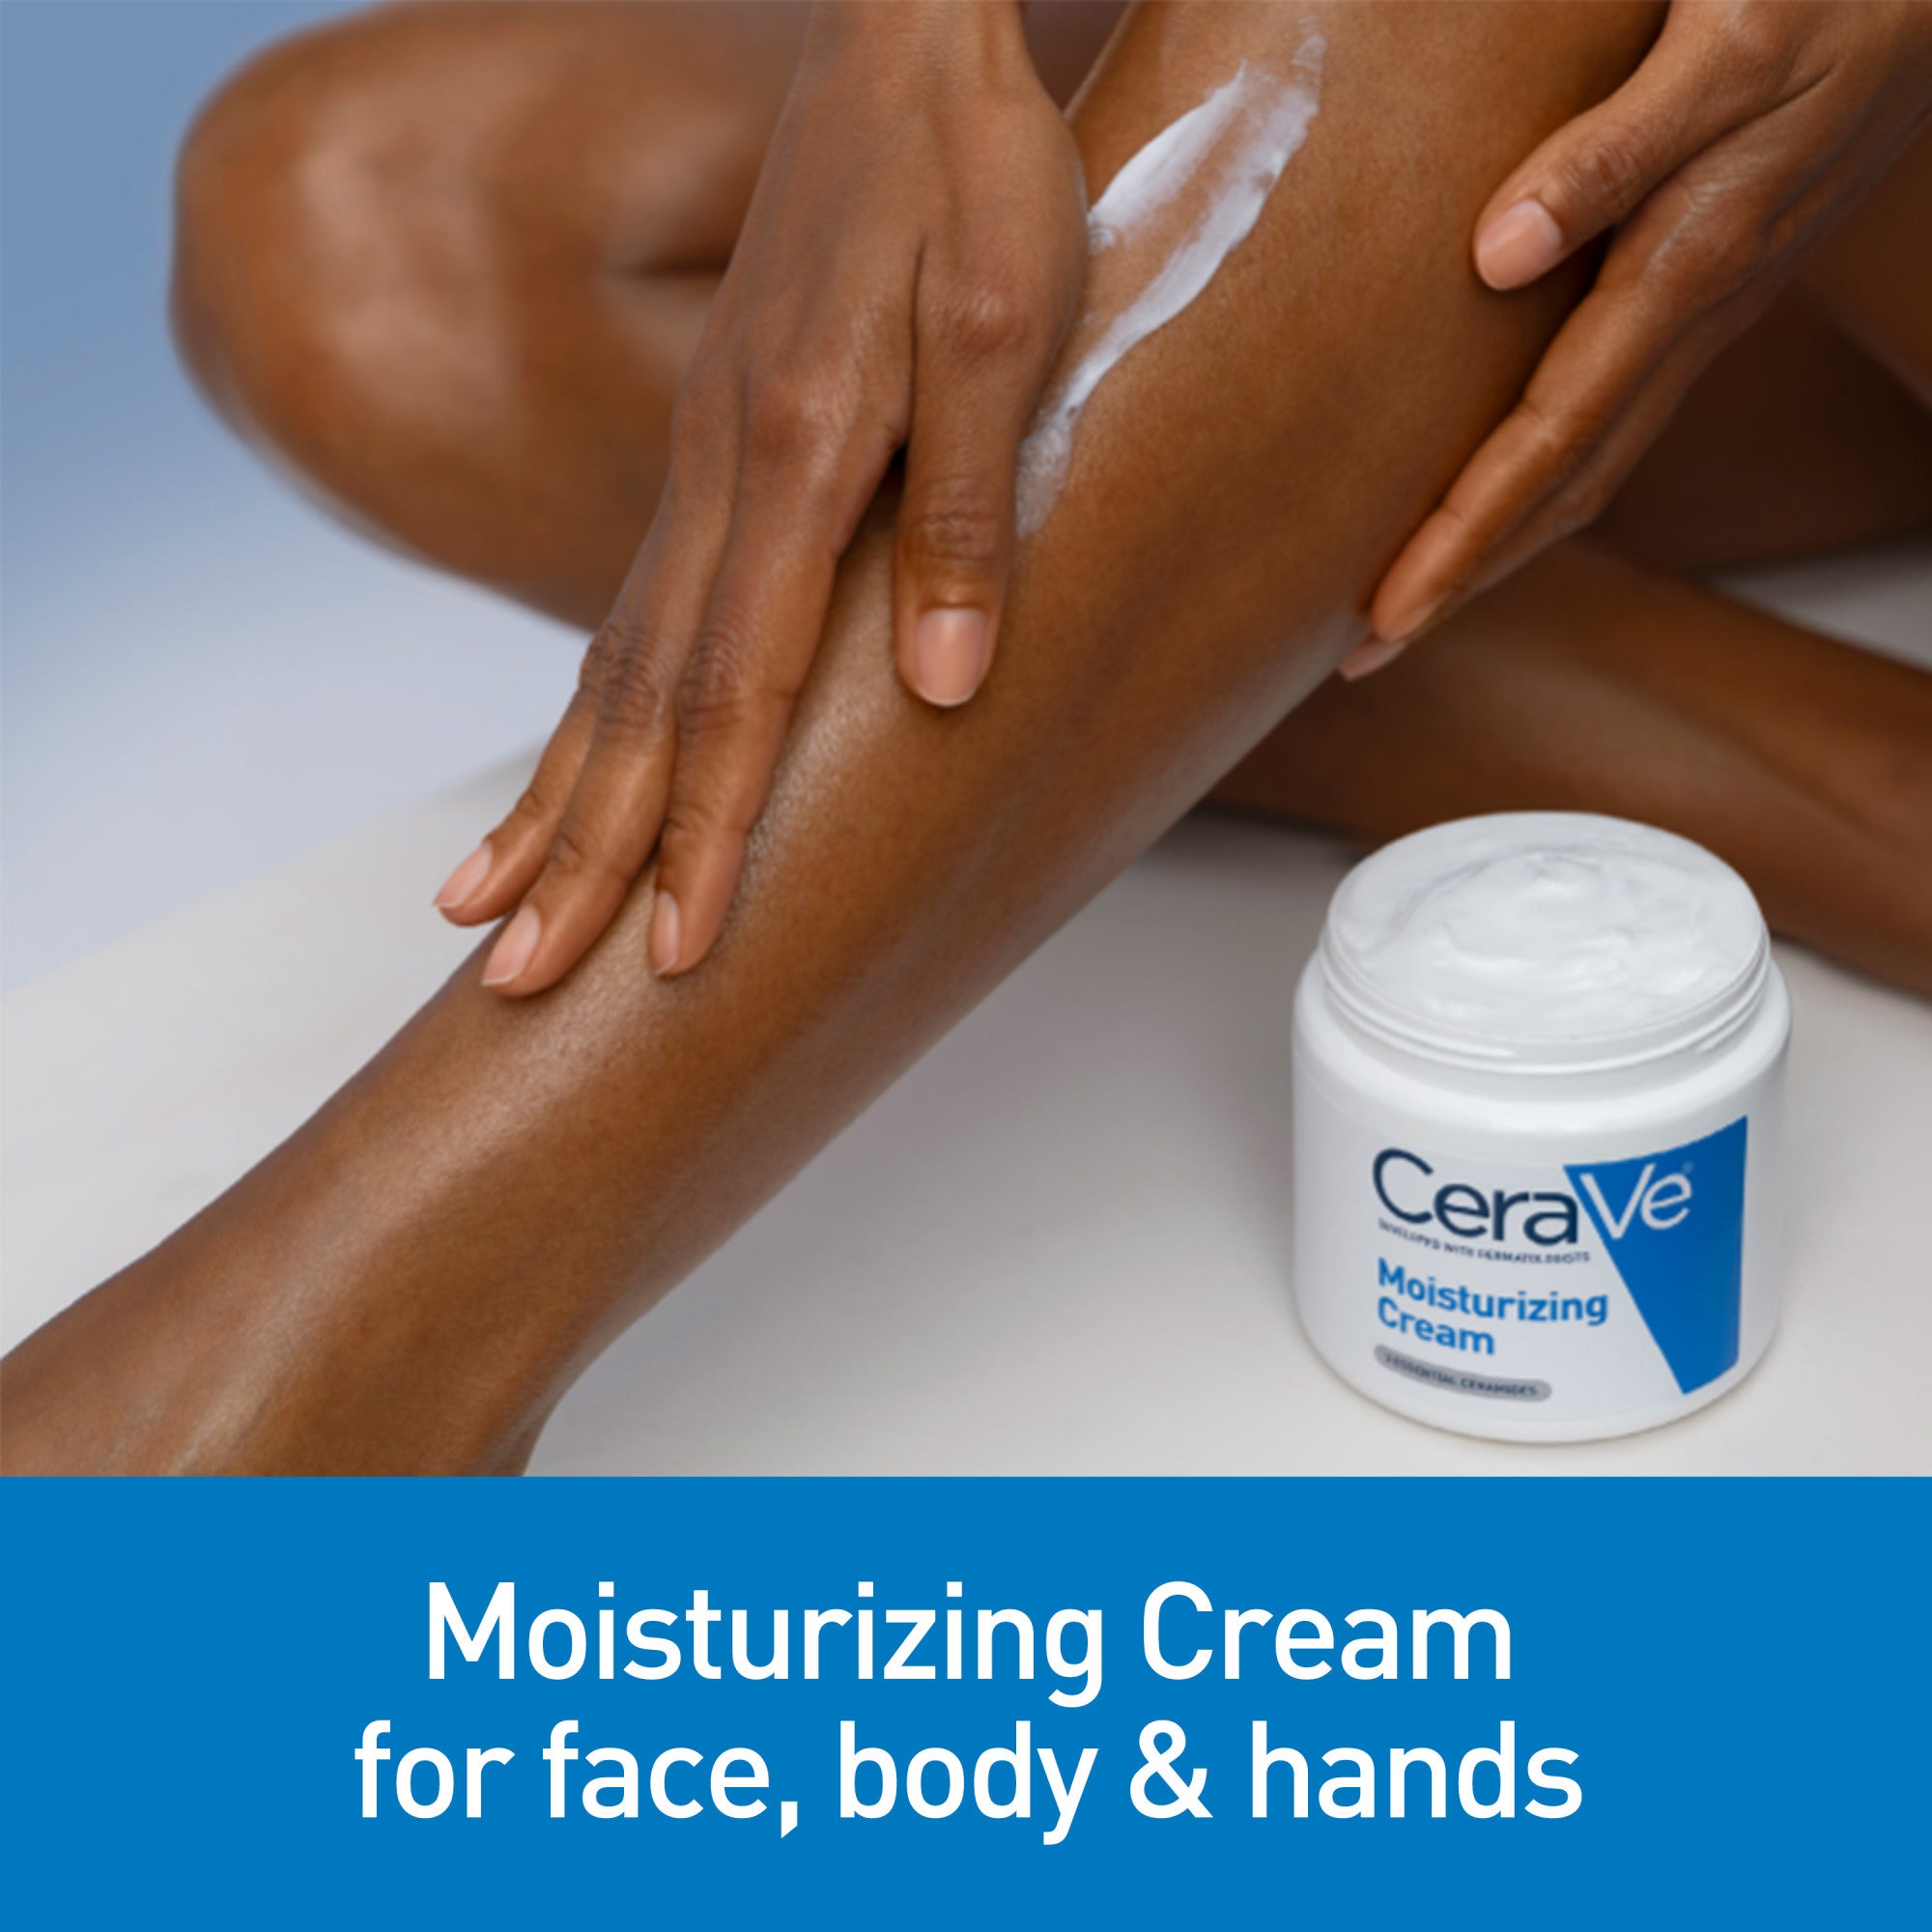 CeraVe Moisturizing Cream Jar for Face and Body for Normal to Dry Skin, 16oz | MTTS196